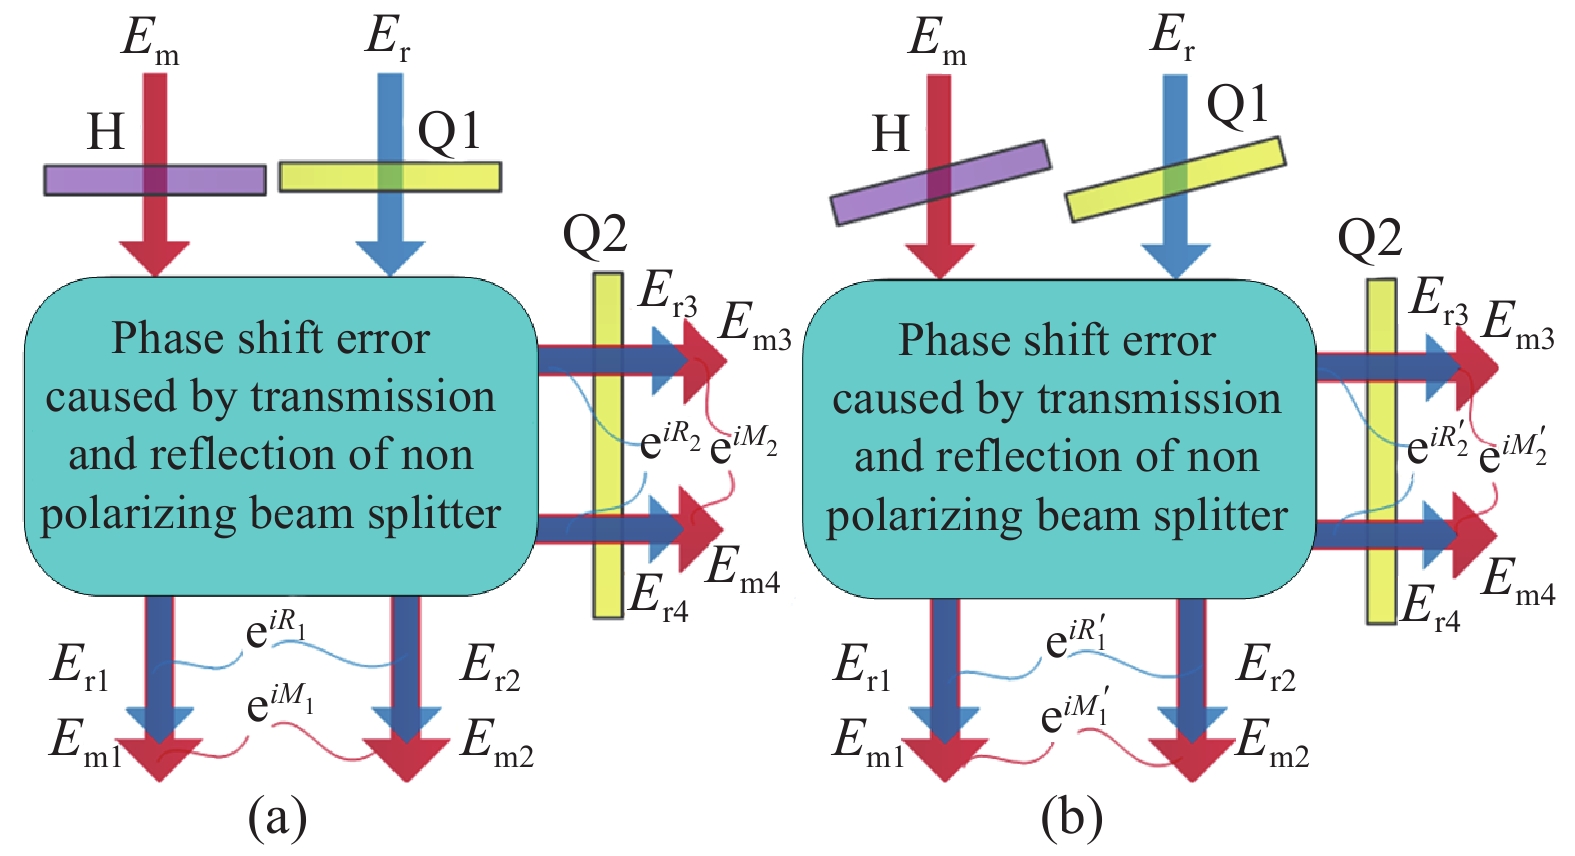 (a) Normal beam incident to wave plates; (b) Non quadrature phase error compensation by yawing wave plates